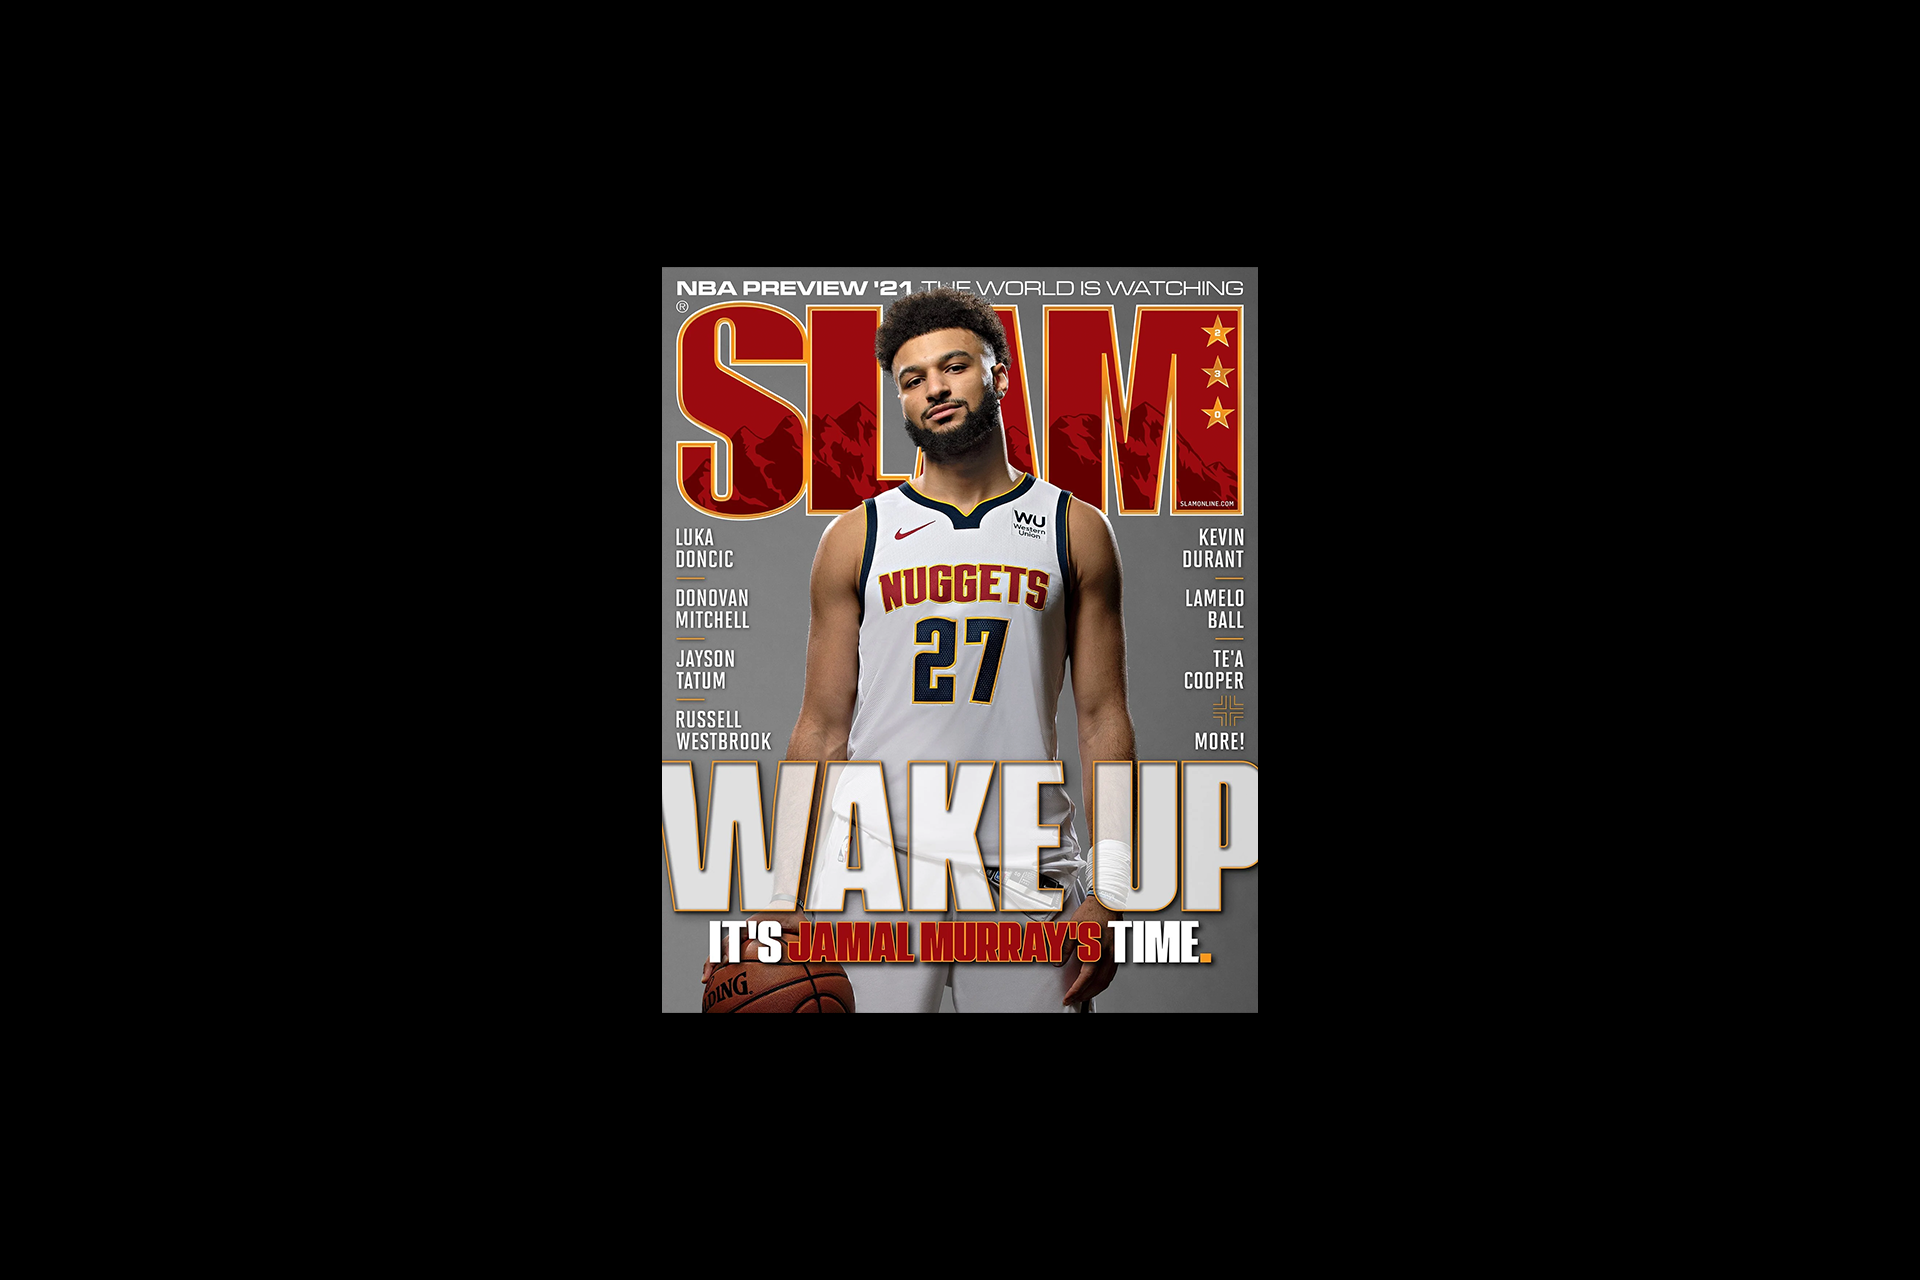 Here’s a Look Back on Jamal Murray’s Ascension Over the Years — SLAM 230 Cover and More